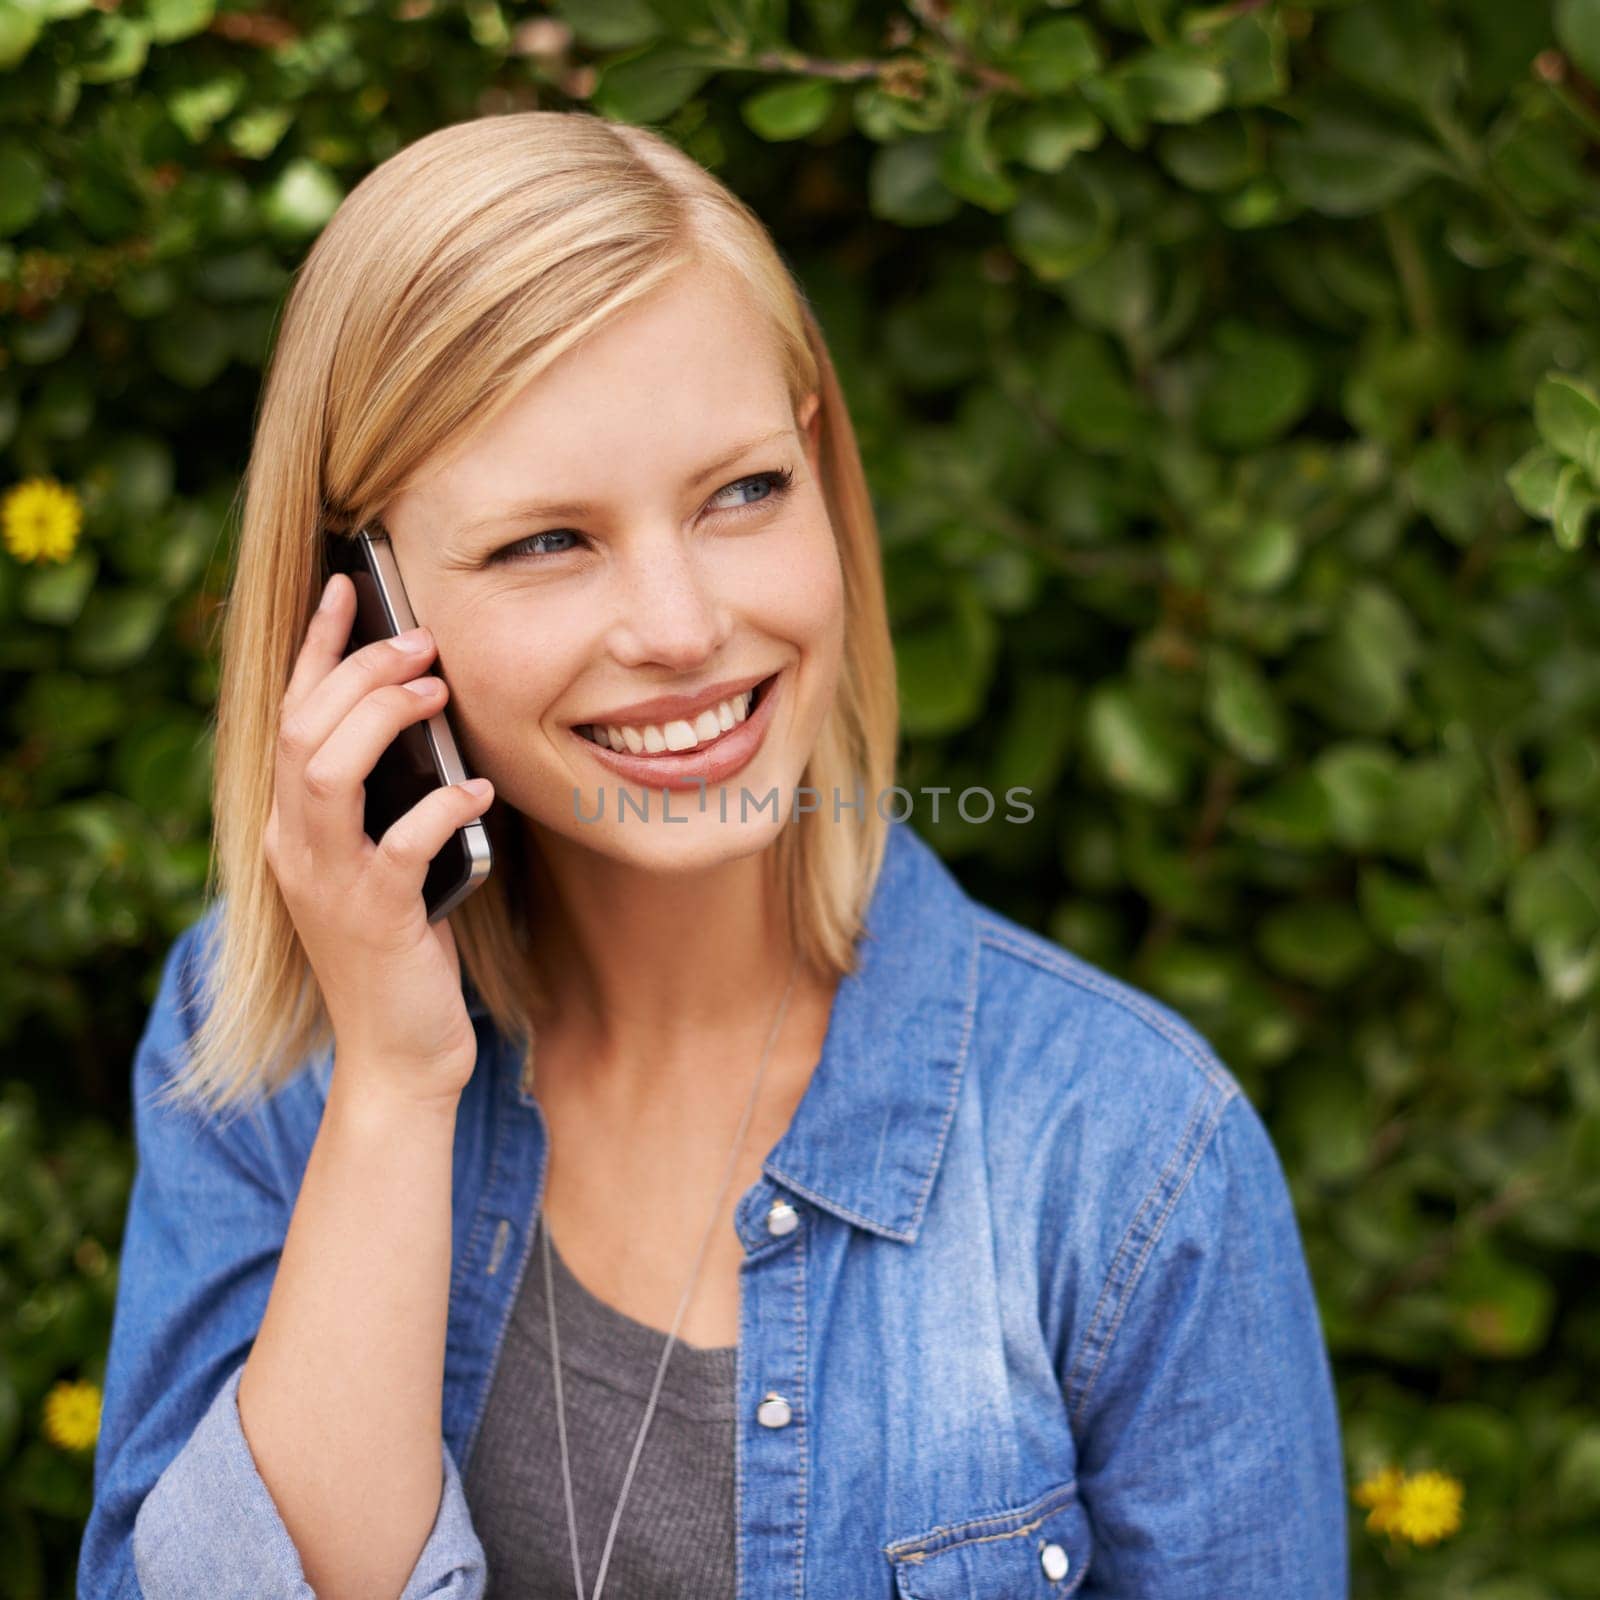 Phone call, smile and happy woman relax in a park with online conversation, listening or chat. Smartphone, hello or lady person in nature with web communication for taxi, chauffeur or commute service by YuriArcurs